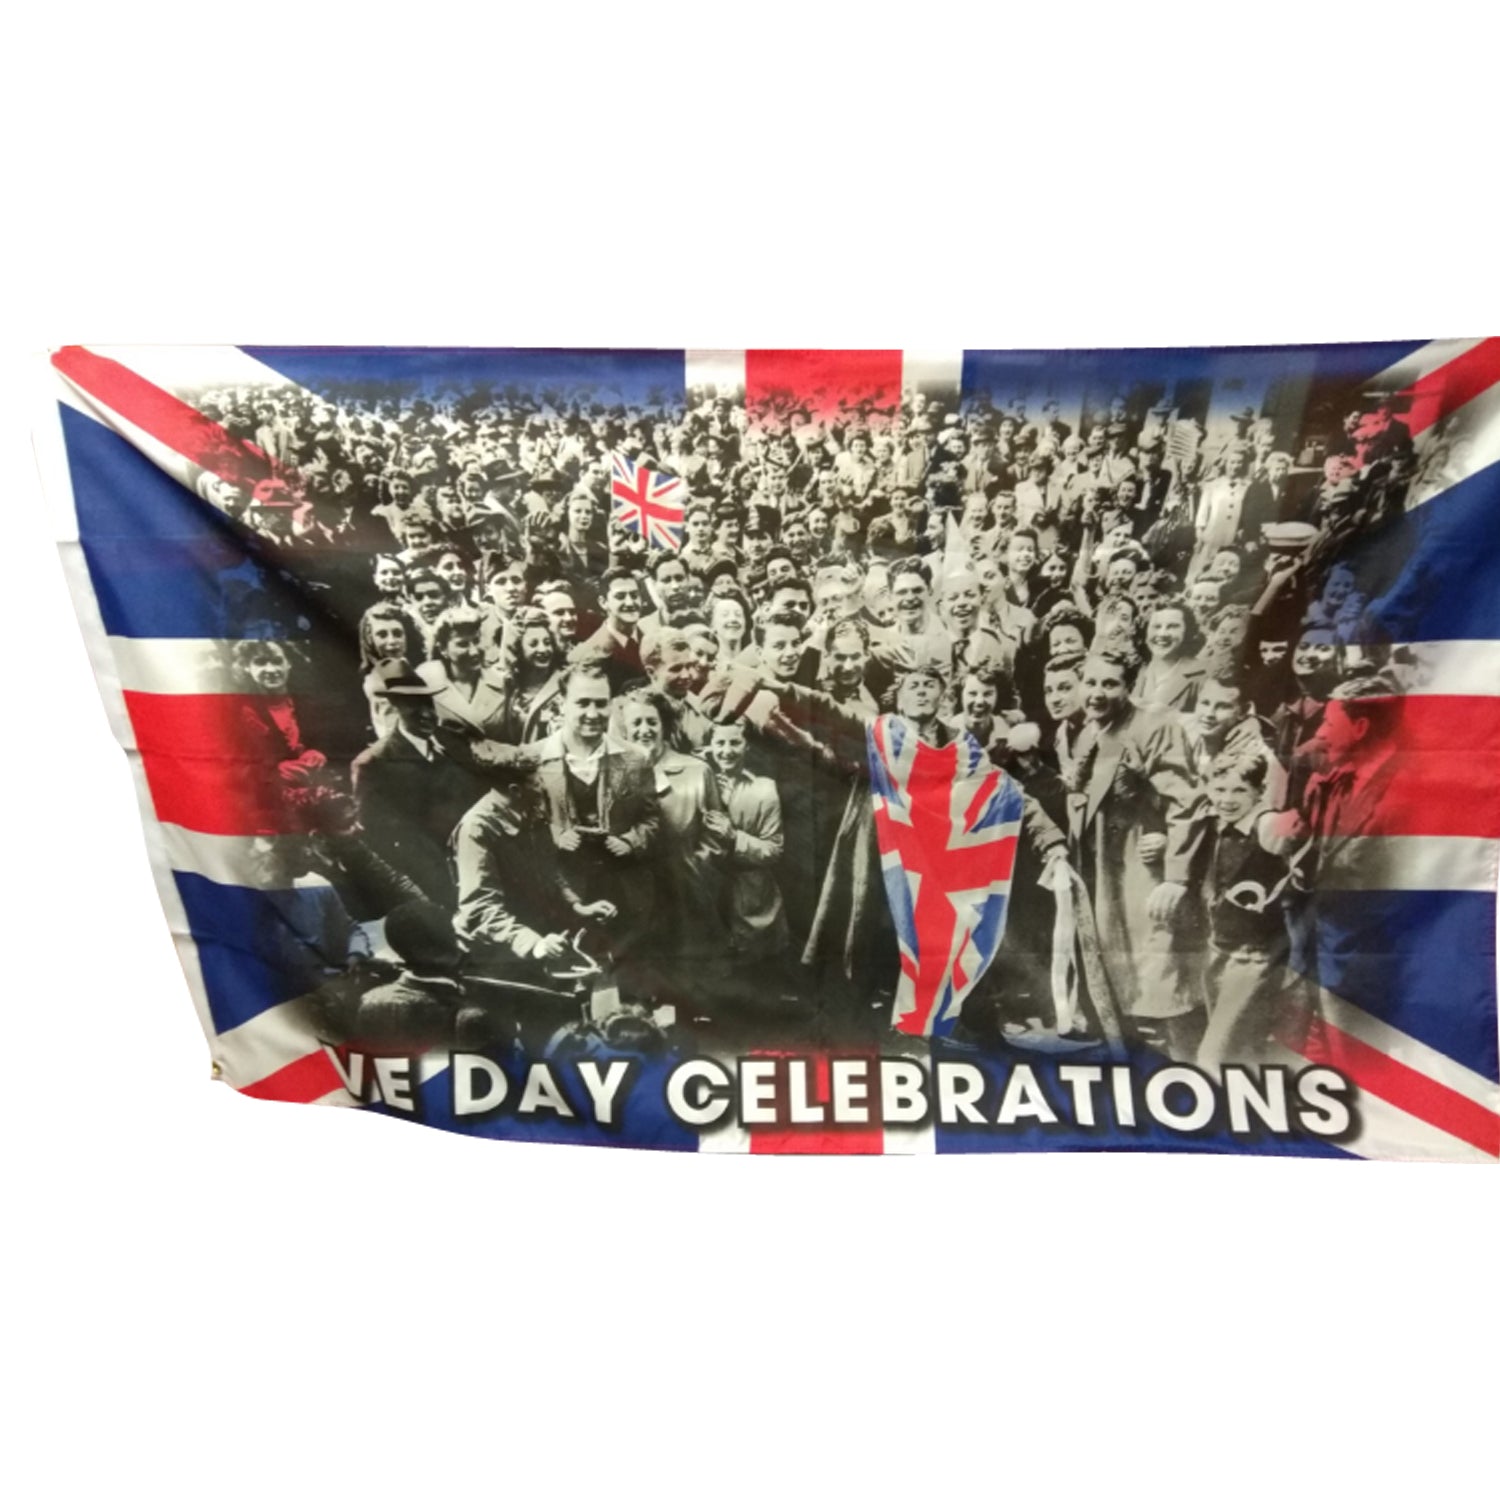 VE Day Celebrations Polyester Fabric Flag - 5ft x 3ft